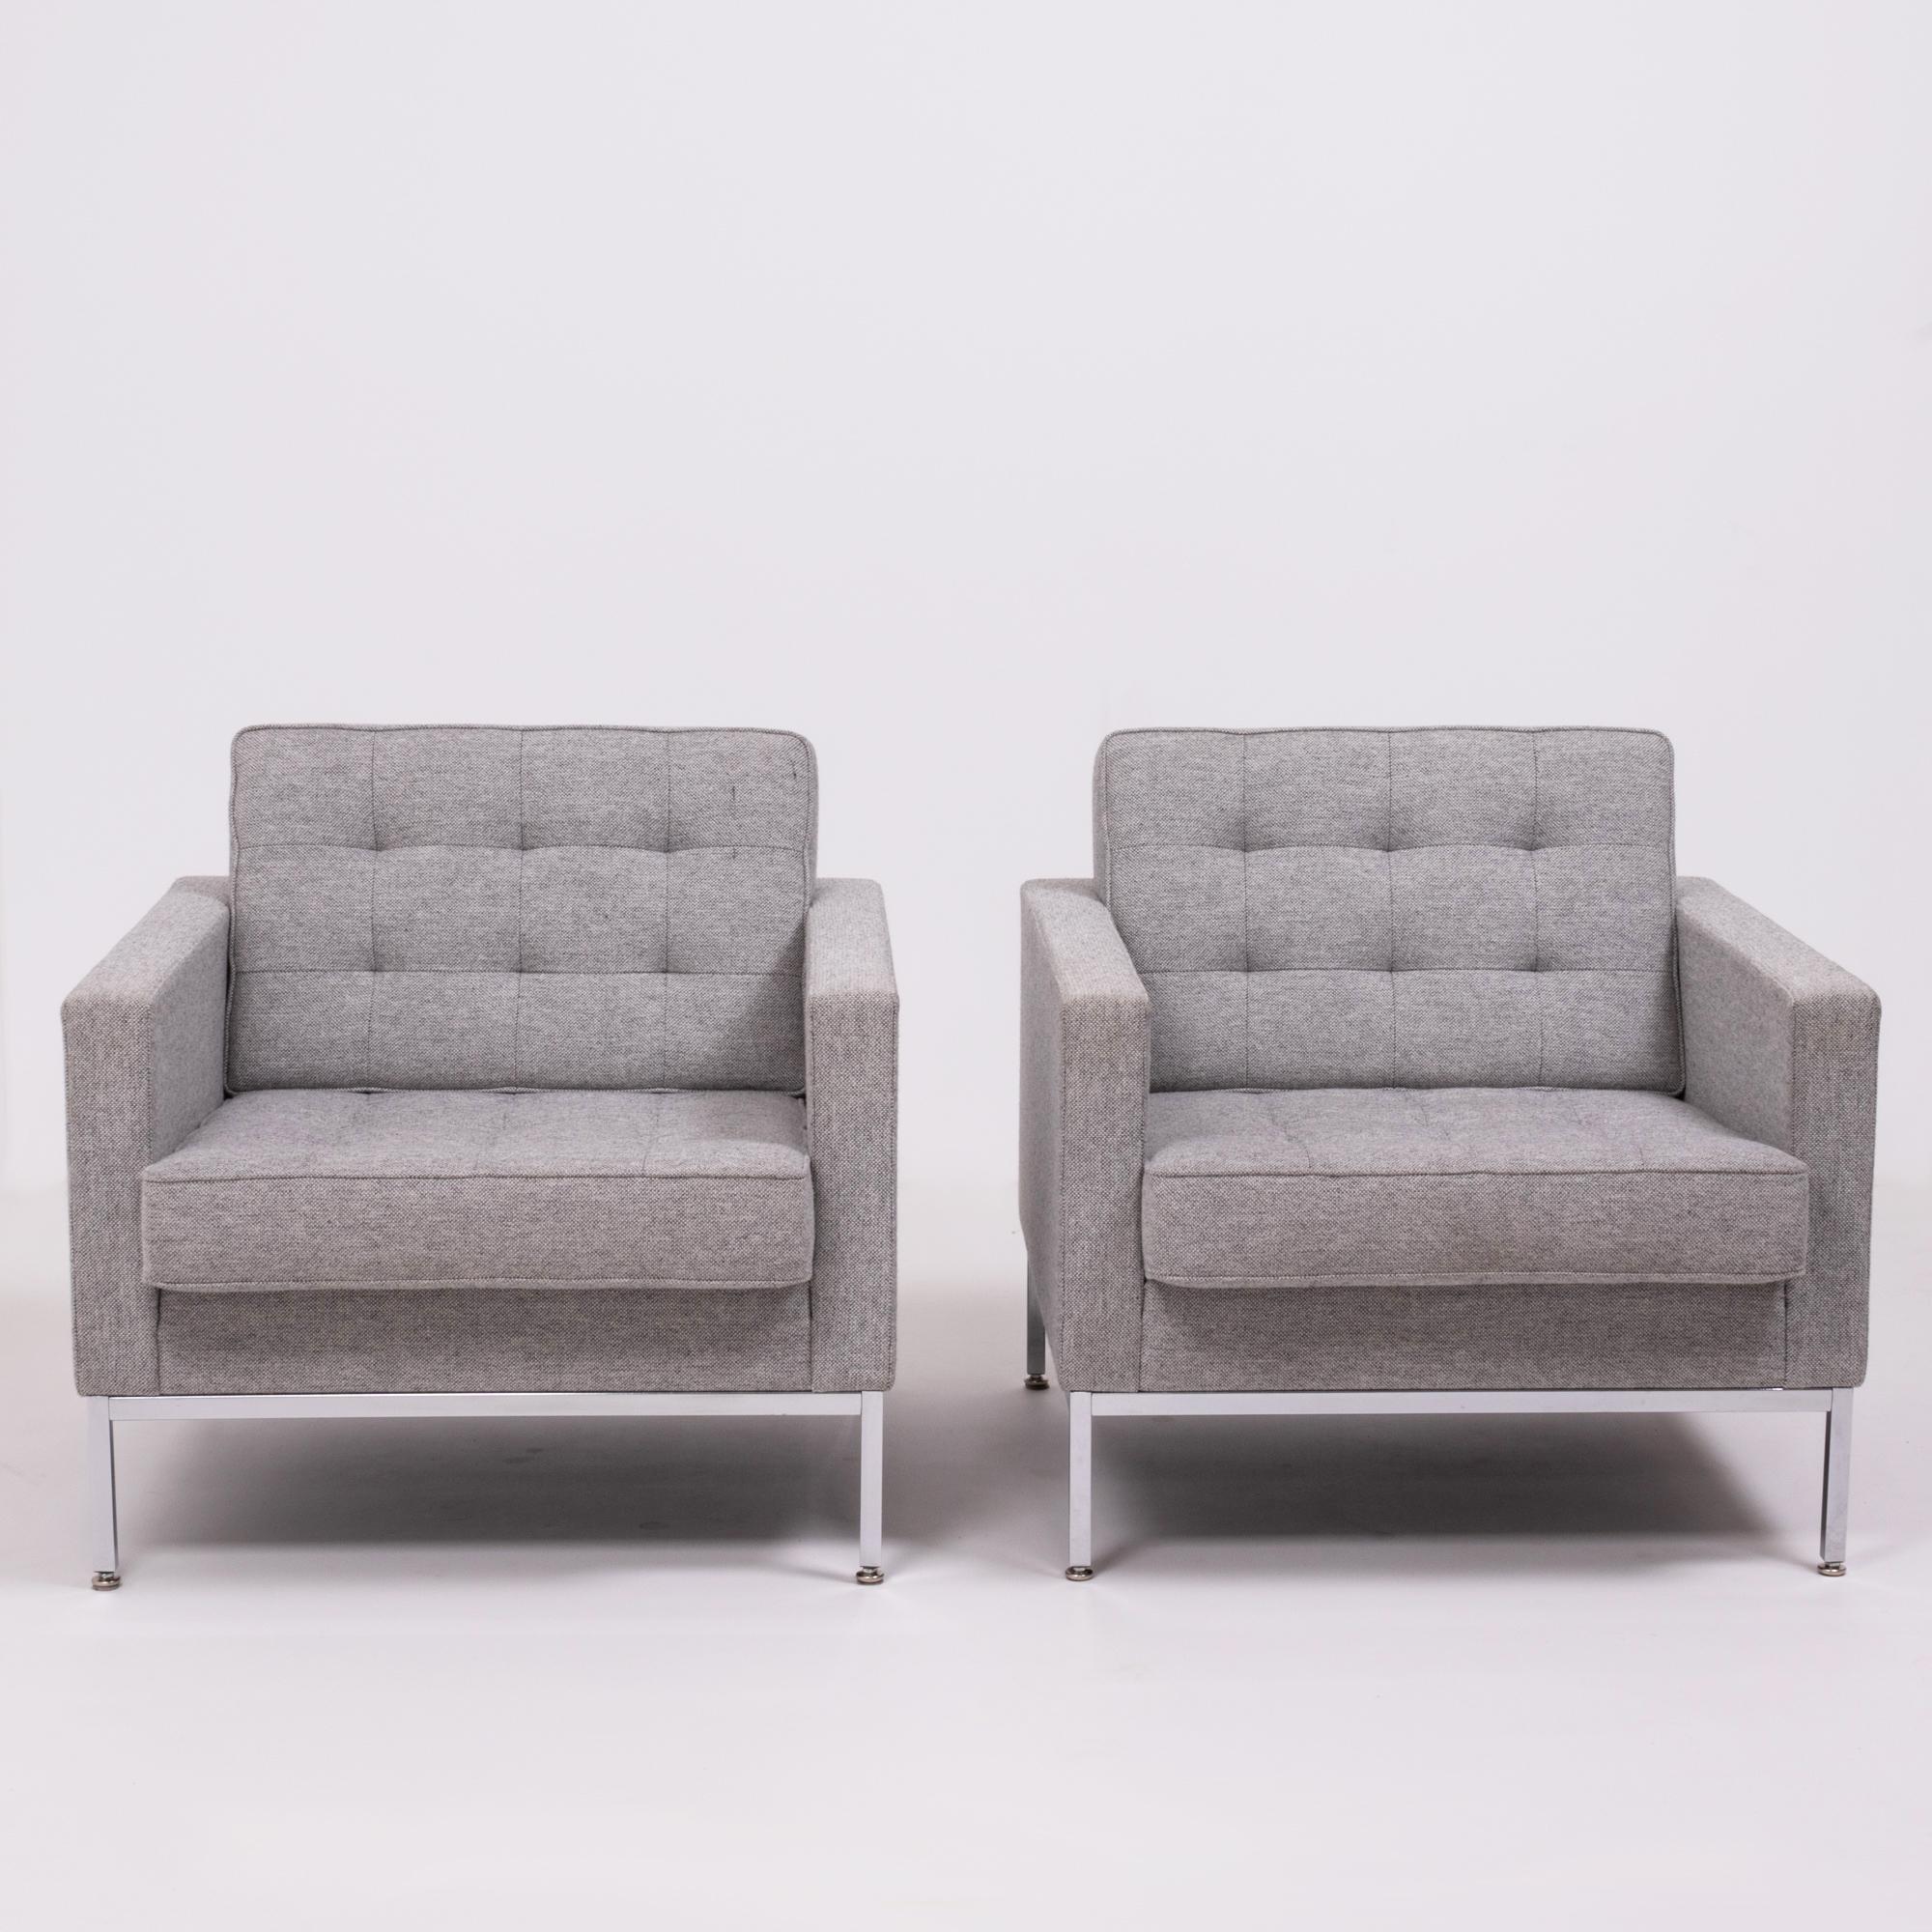 A rare, original “Florence Knoll” pair of lounge chairs from the world renown furniture house of Knoll Studio, dressed in a sublime, tactile woven-wool fabric, and with polished chrome framework.

Knoll Studio pieces are the epitome of contemporary